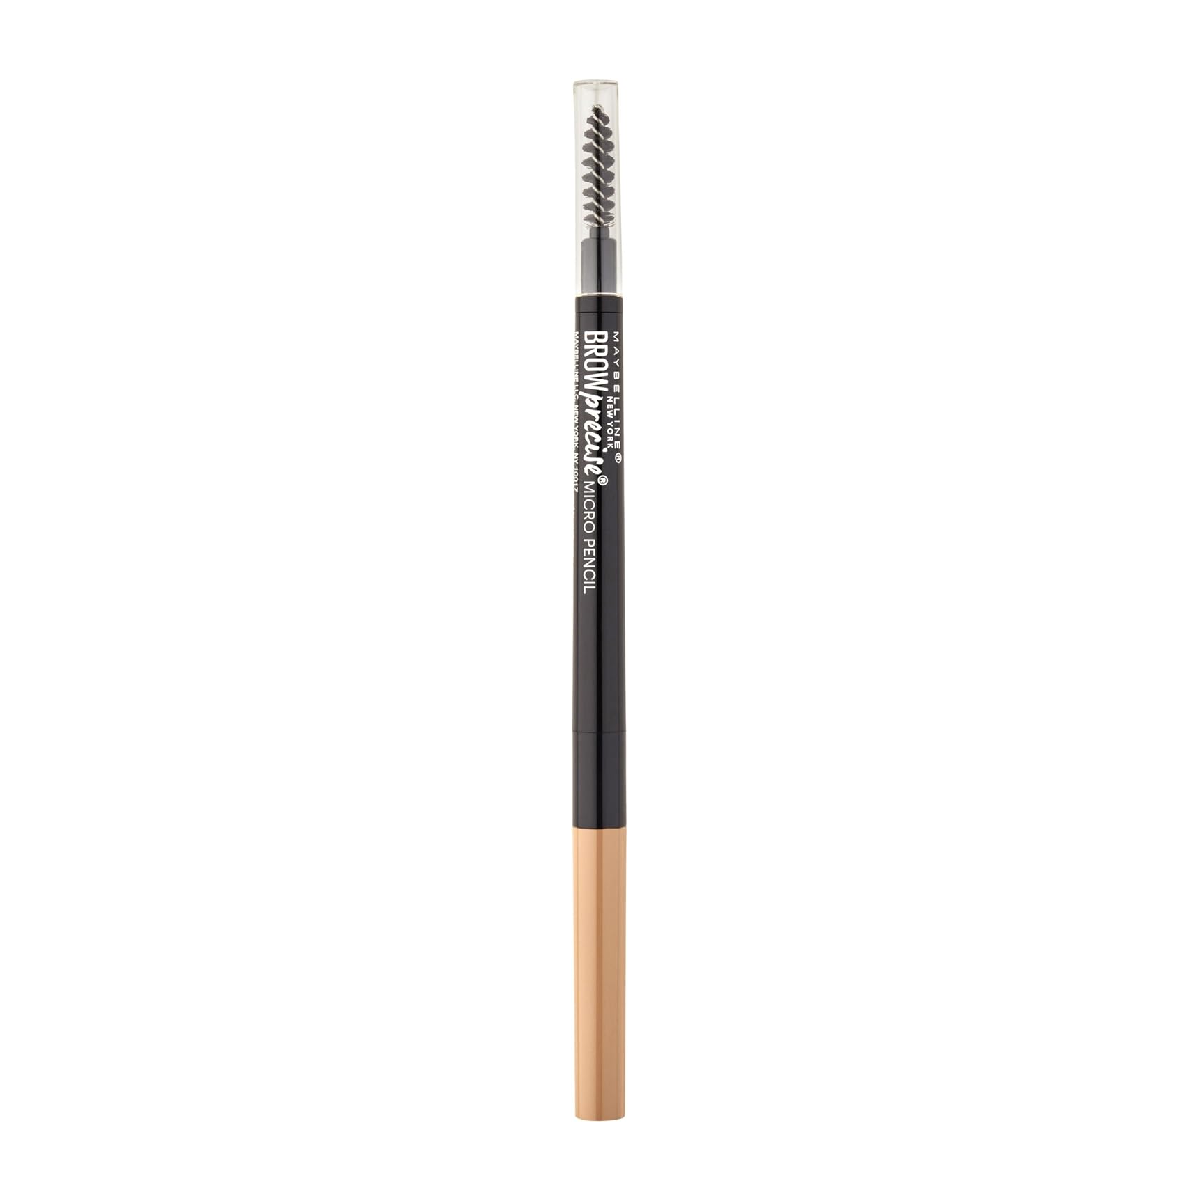 Maybelline Brow Precise Micro Pencil - a brow pencil against a white background.